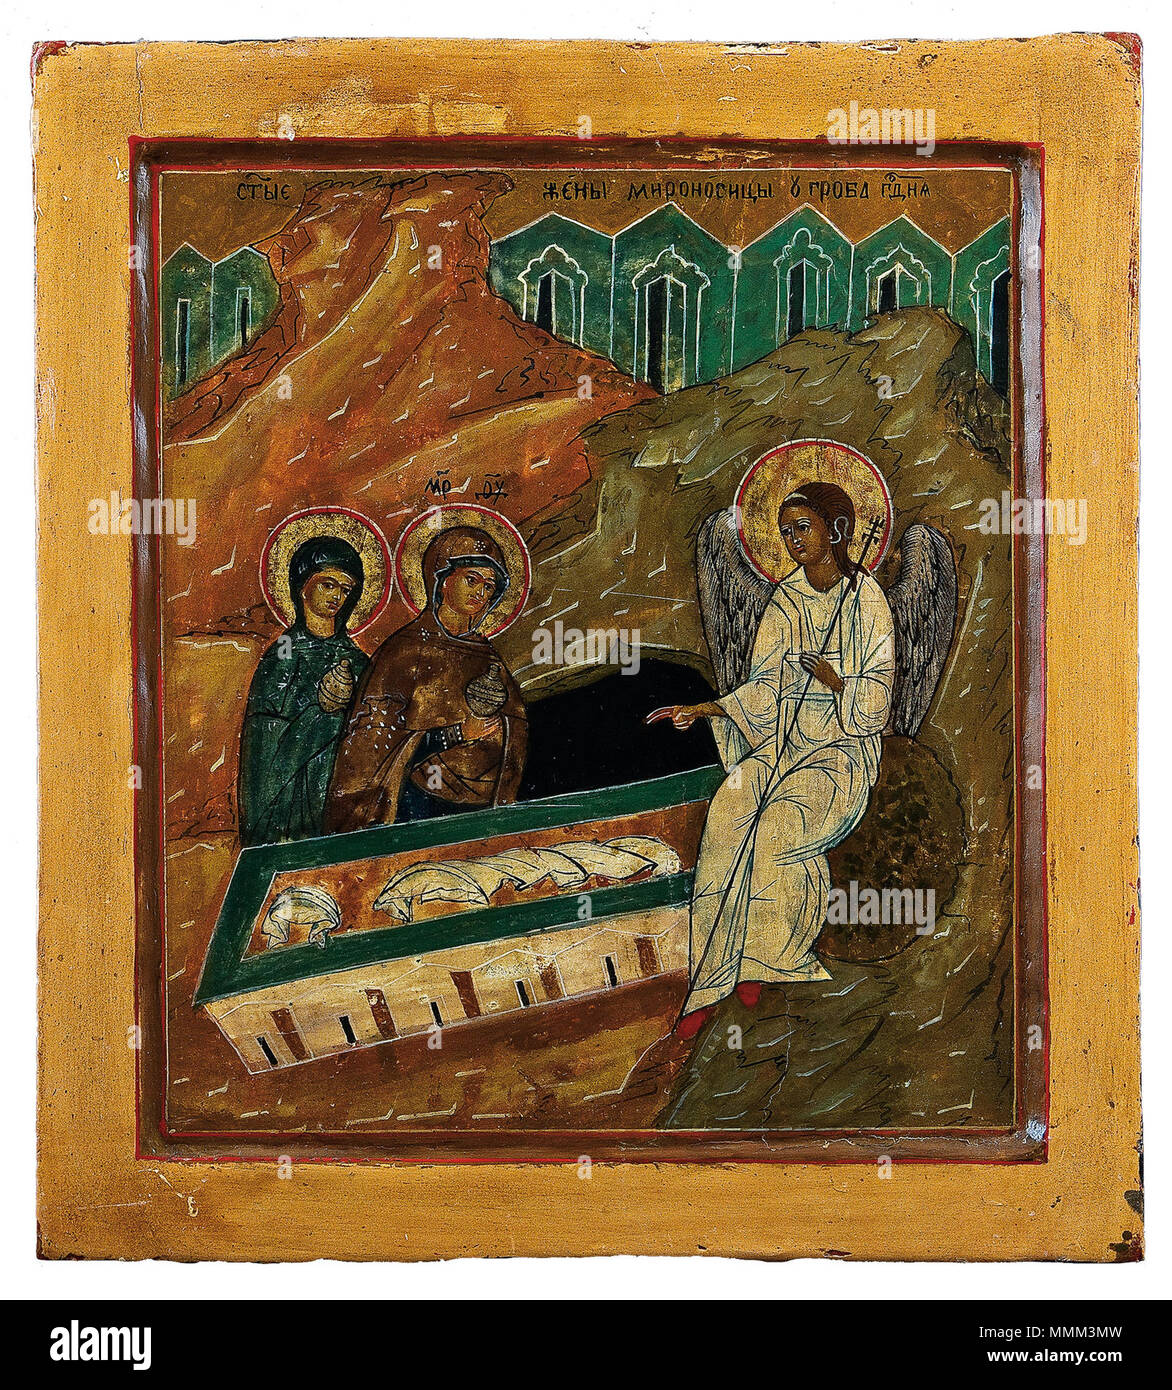 . The two women at the Sepulchre. Tempera on wood panel. The two holy women, Mary Mother of God and Mary Magdalene advancing from the left, holding unguents with myrrh, encountering a sarcophagus containing only the shroud of Christ. The seated angel animatedly pointing to the empty tomb. Rocky hills behind, the image's horizon limited by the high walls of Jerusalem. Subtly painted in pastel. Inset in a later panel. Russian, 17th century. 38 x 34 cm. Russland, 17. Jh.  . 17th century. Anonymous Icon of Women at the grave (Russia, 17 c.) Stock Photo